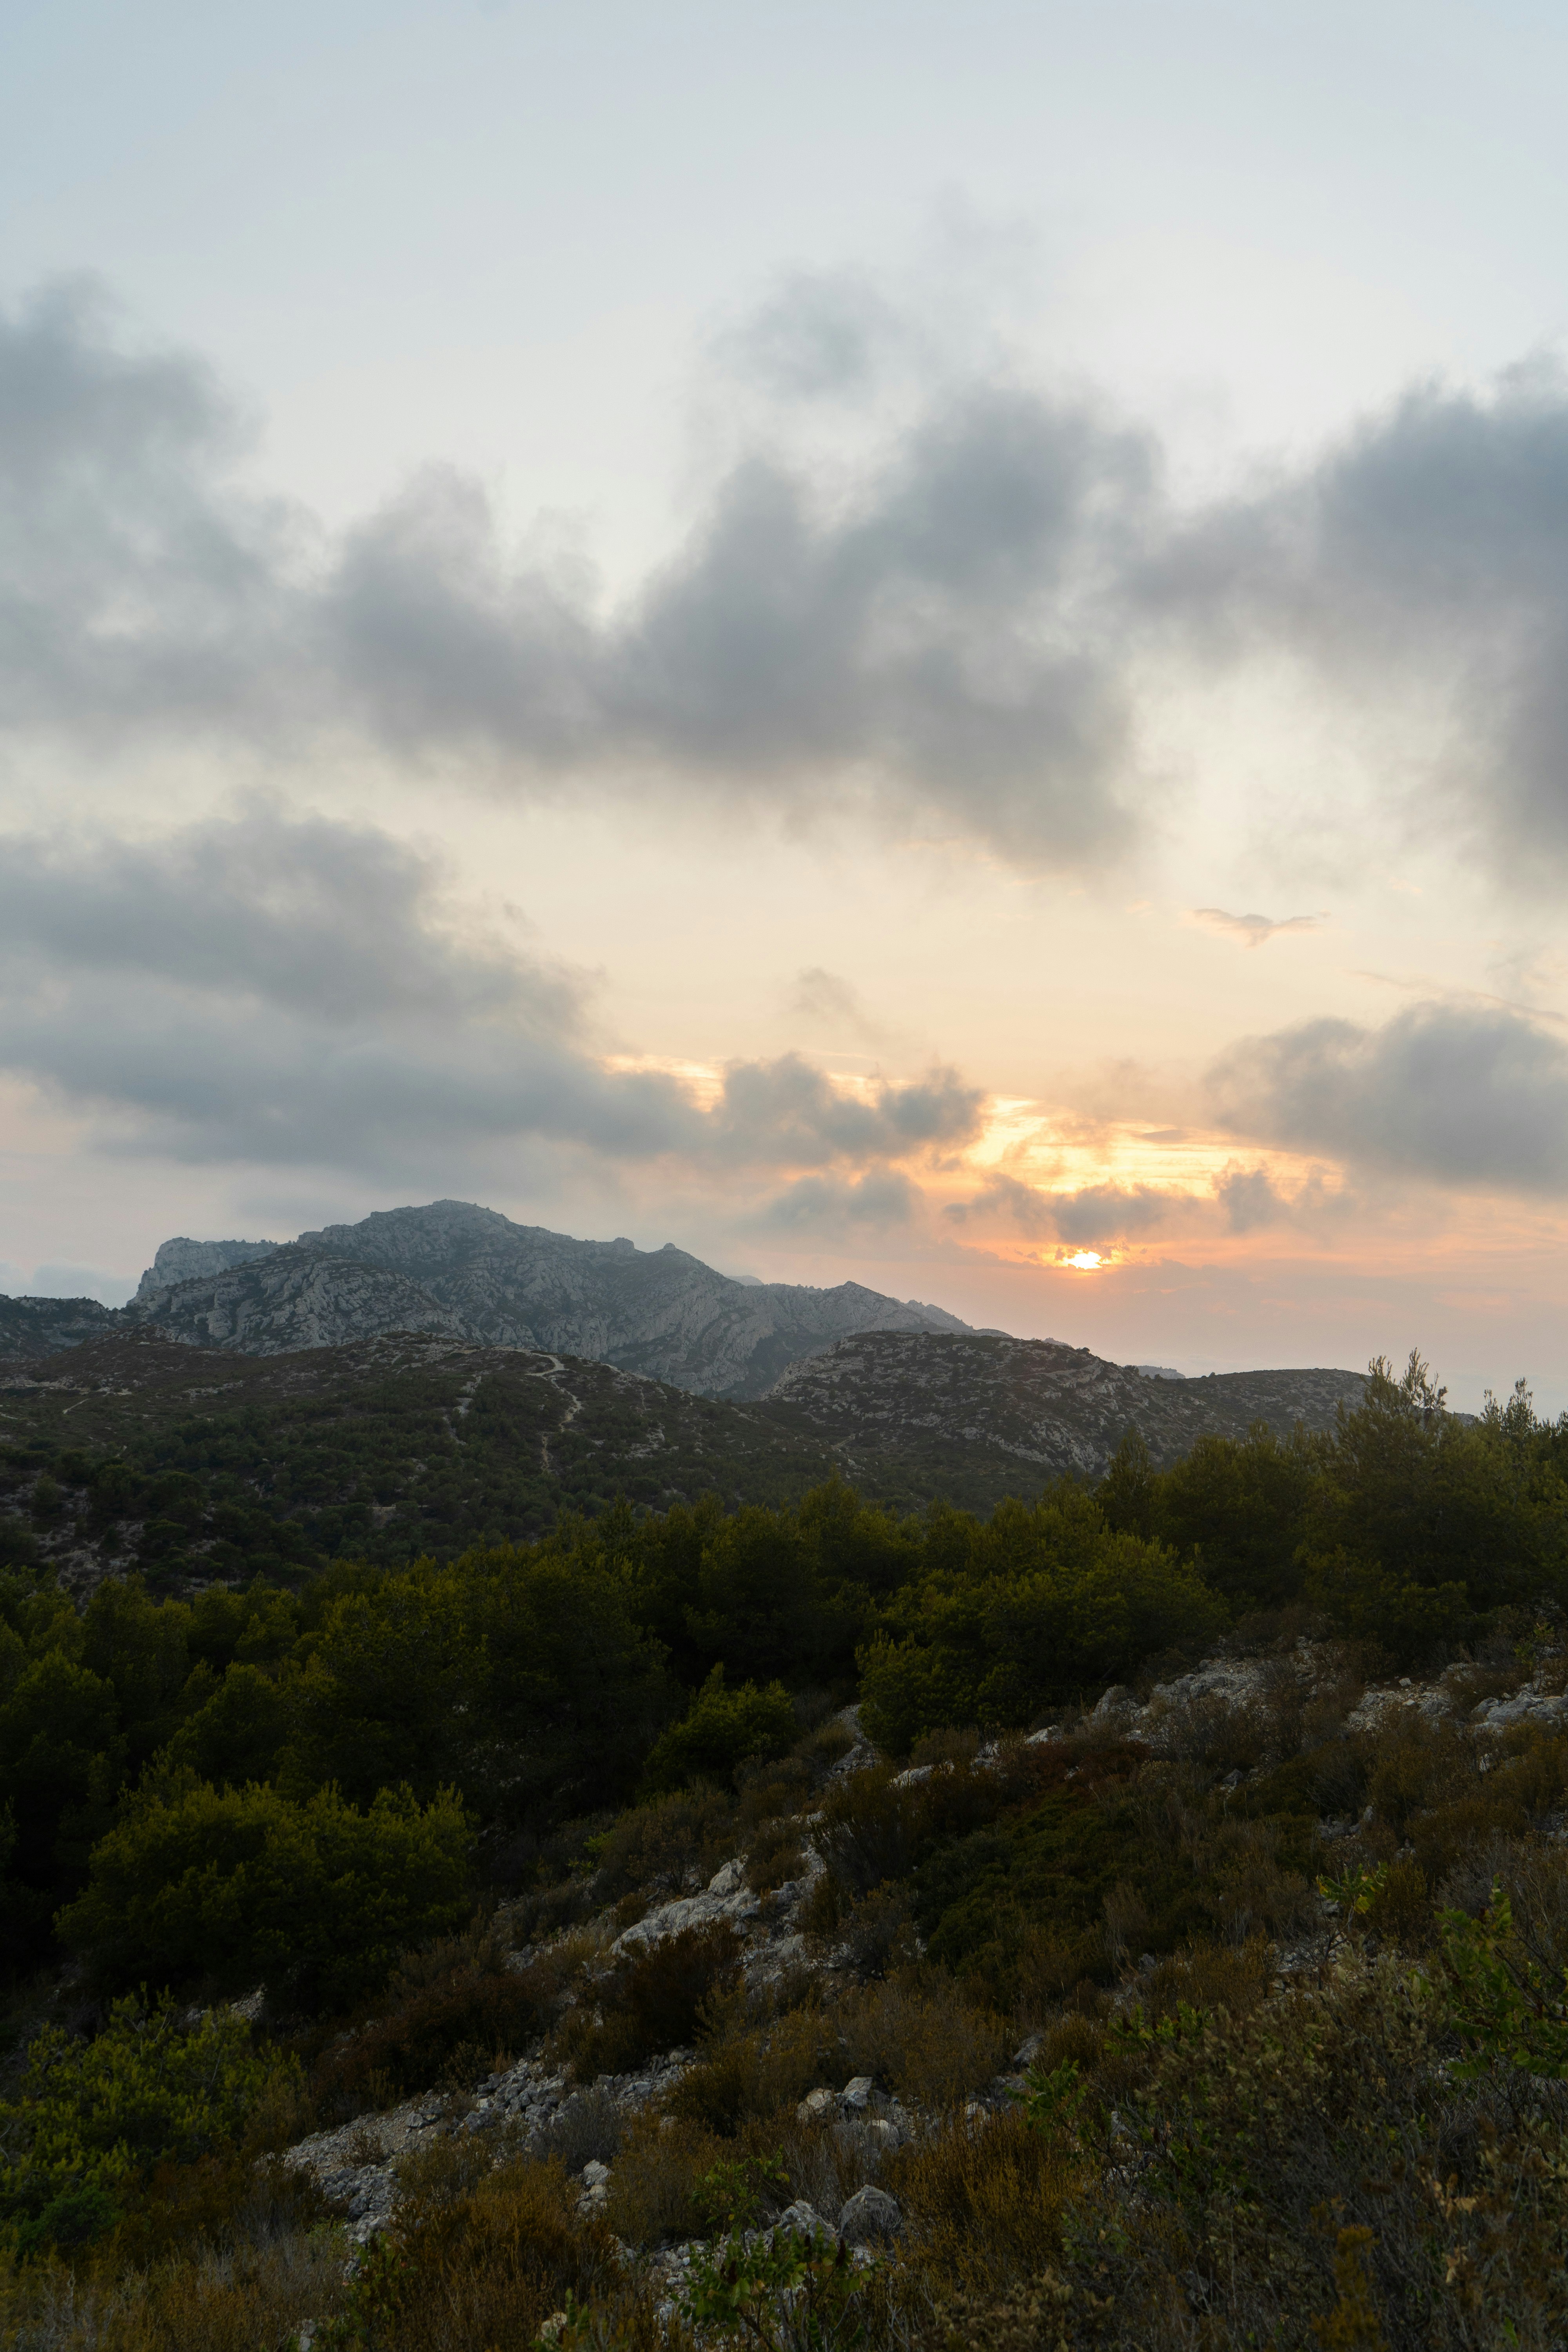 Sunset in Les Calanques National Park, Marseille, France